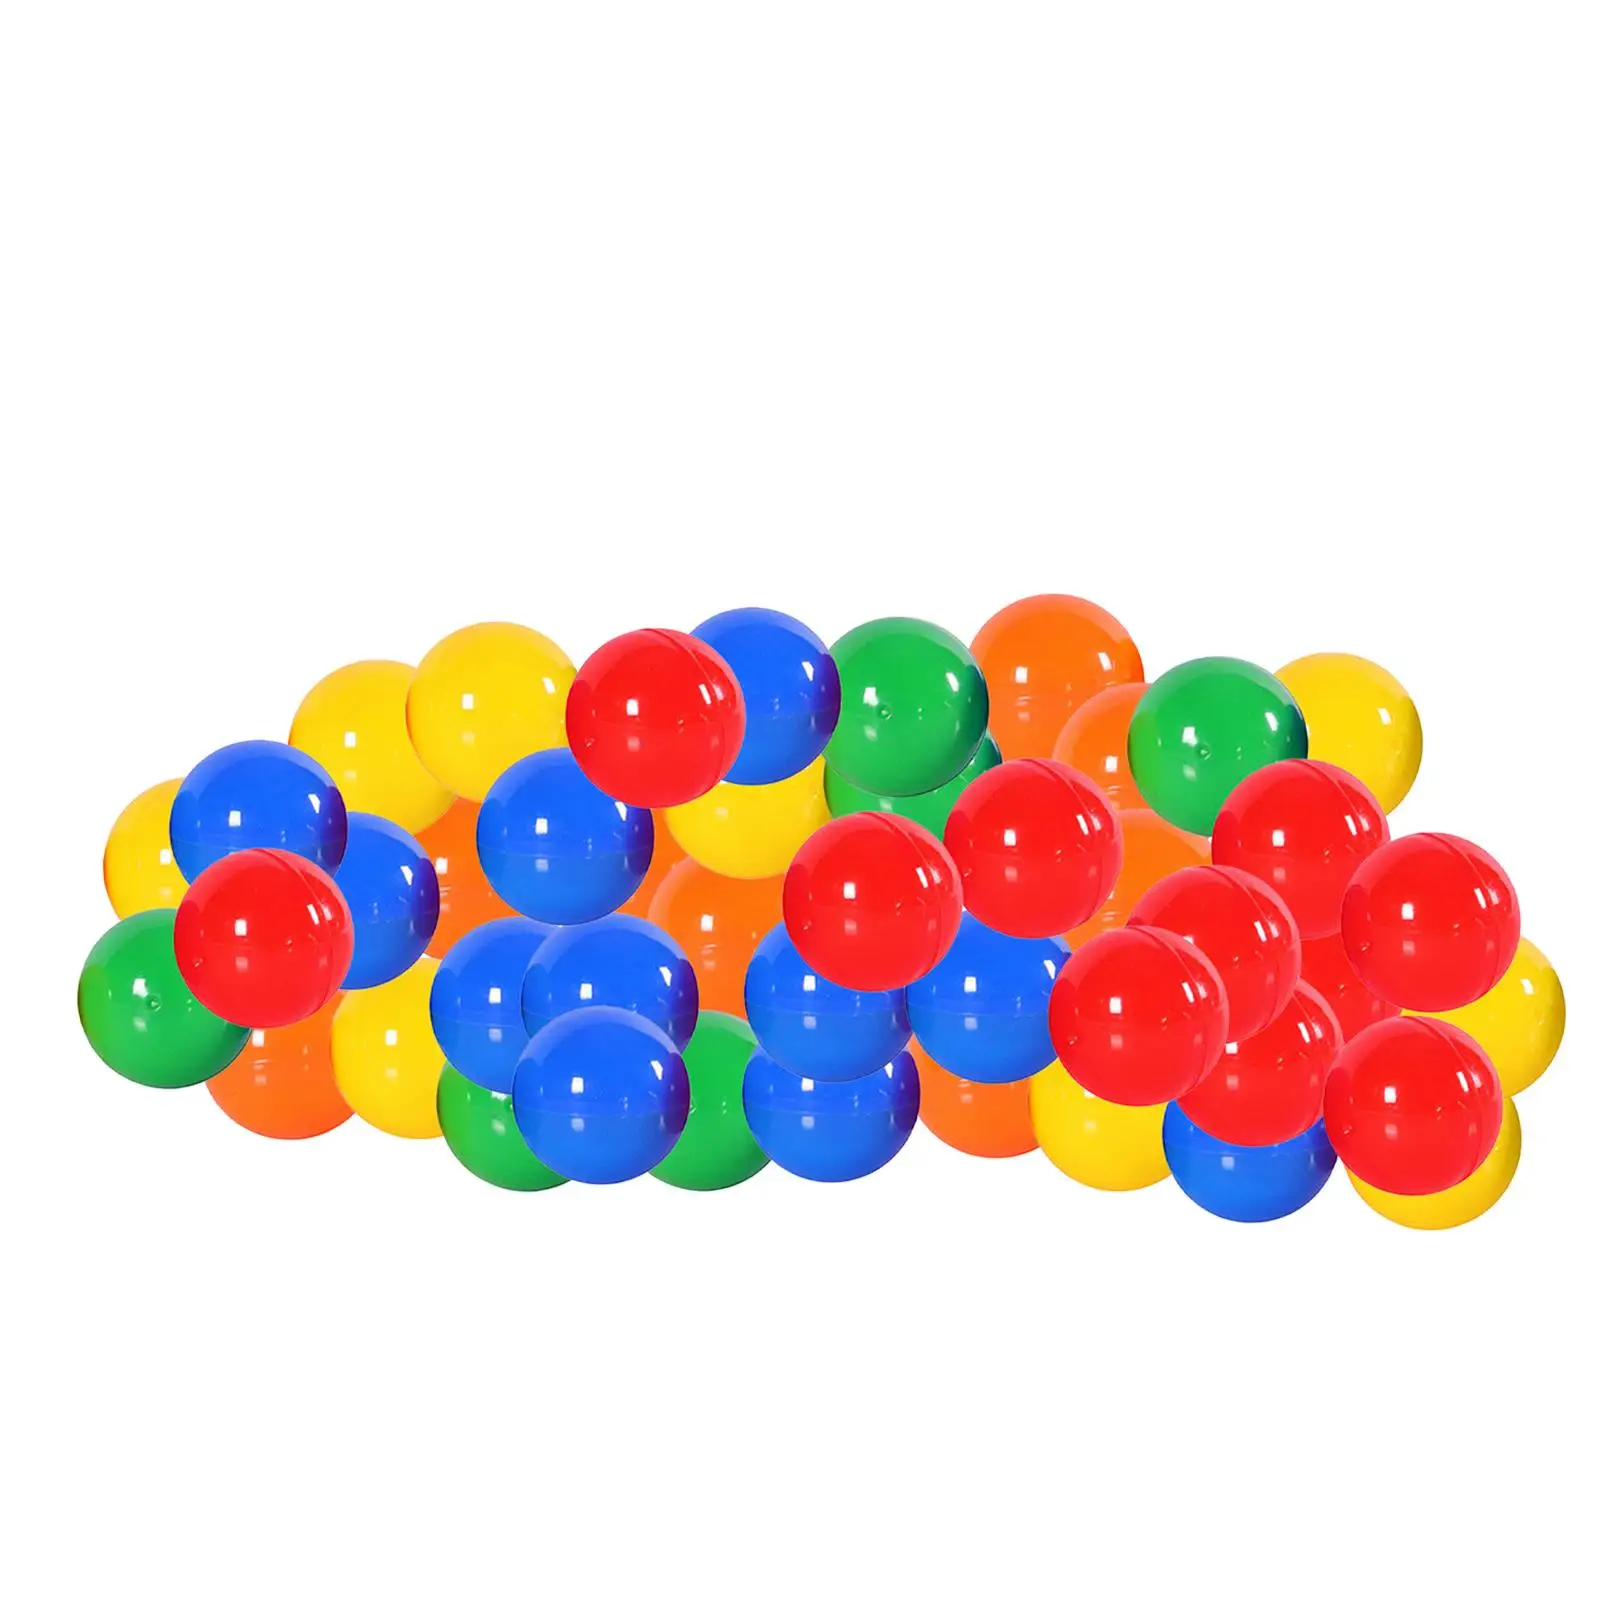 50 Pieces Bingo Ball Devices Lottery Balls for Parties Nights Traveling